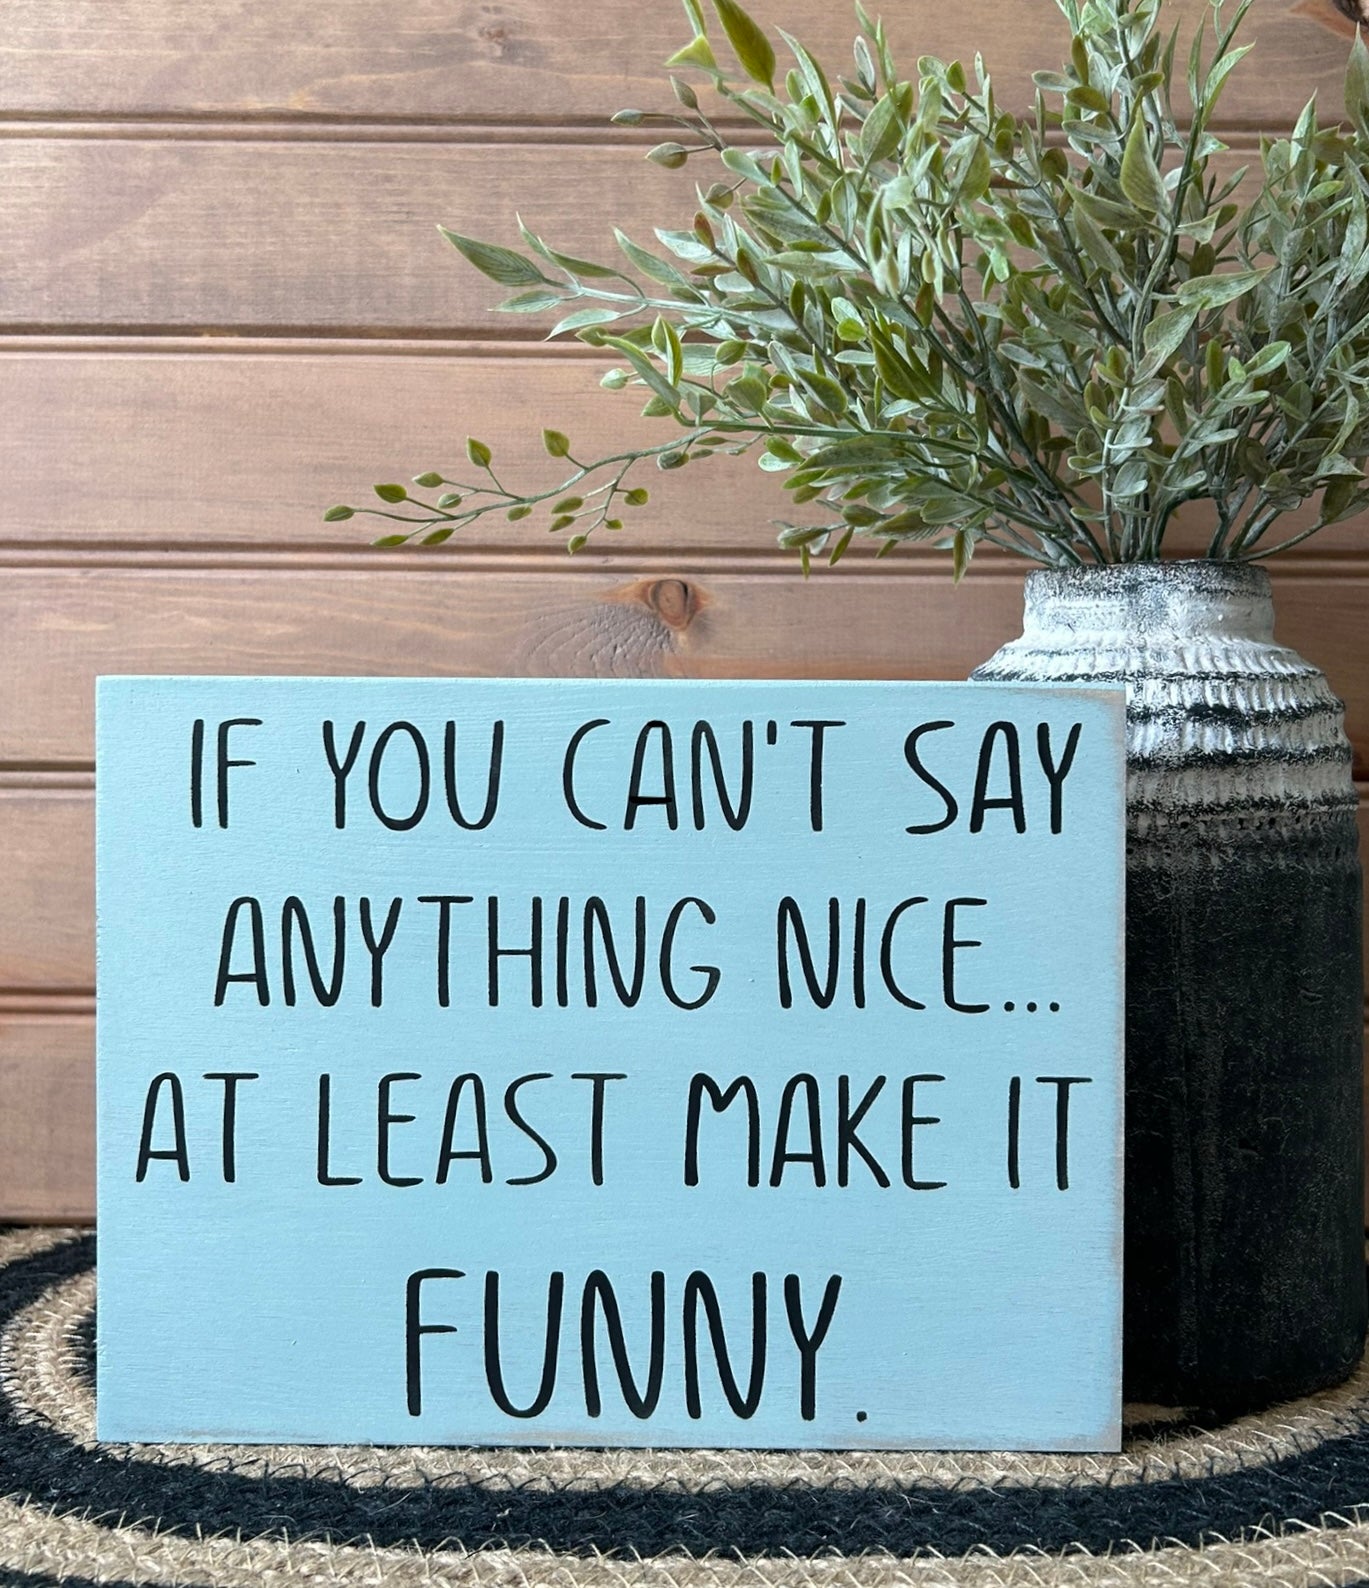 If You Can't Say Anything Nice - Funny Rustic Wood Sign